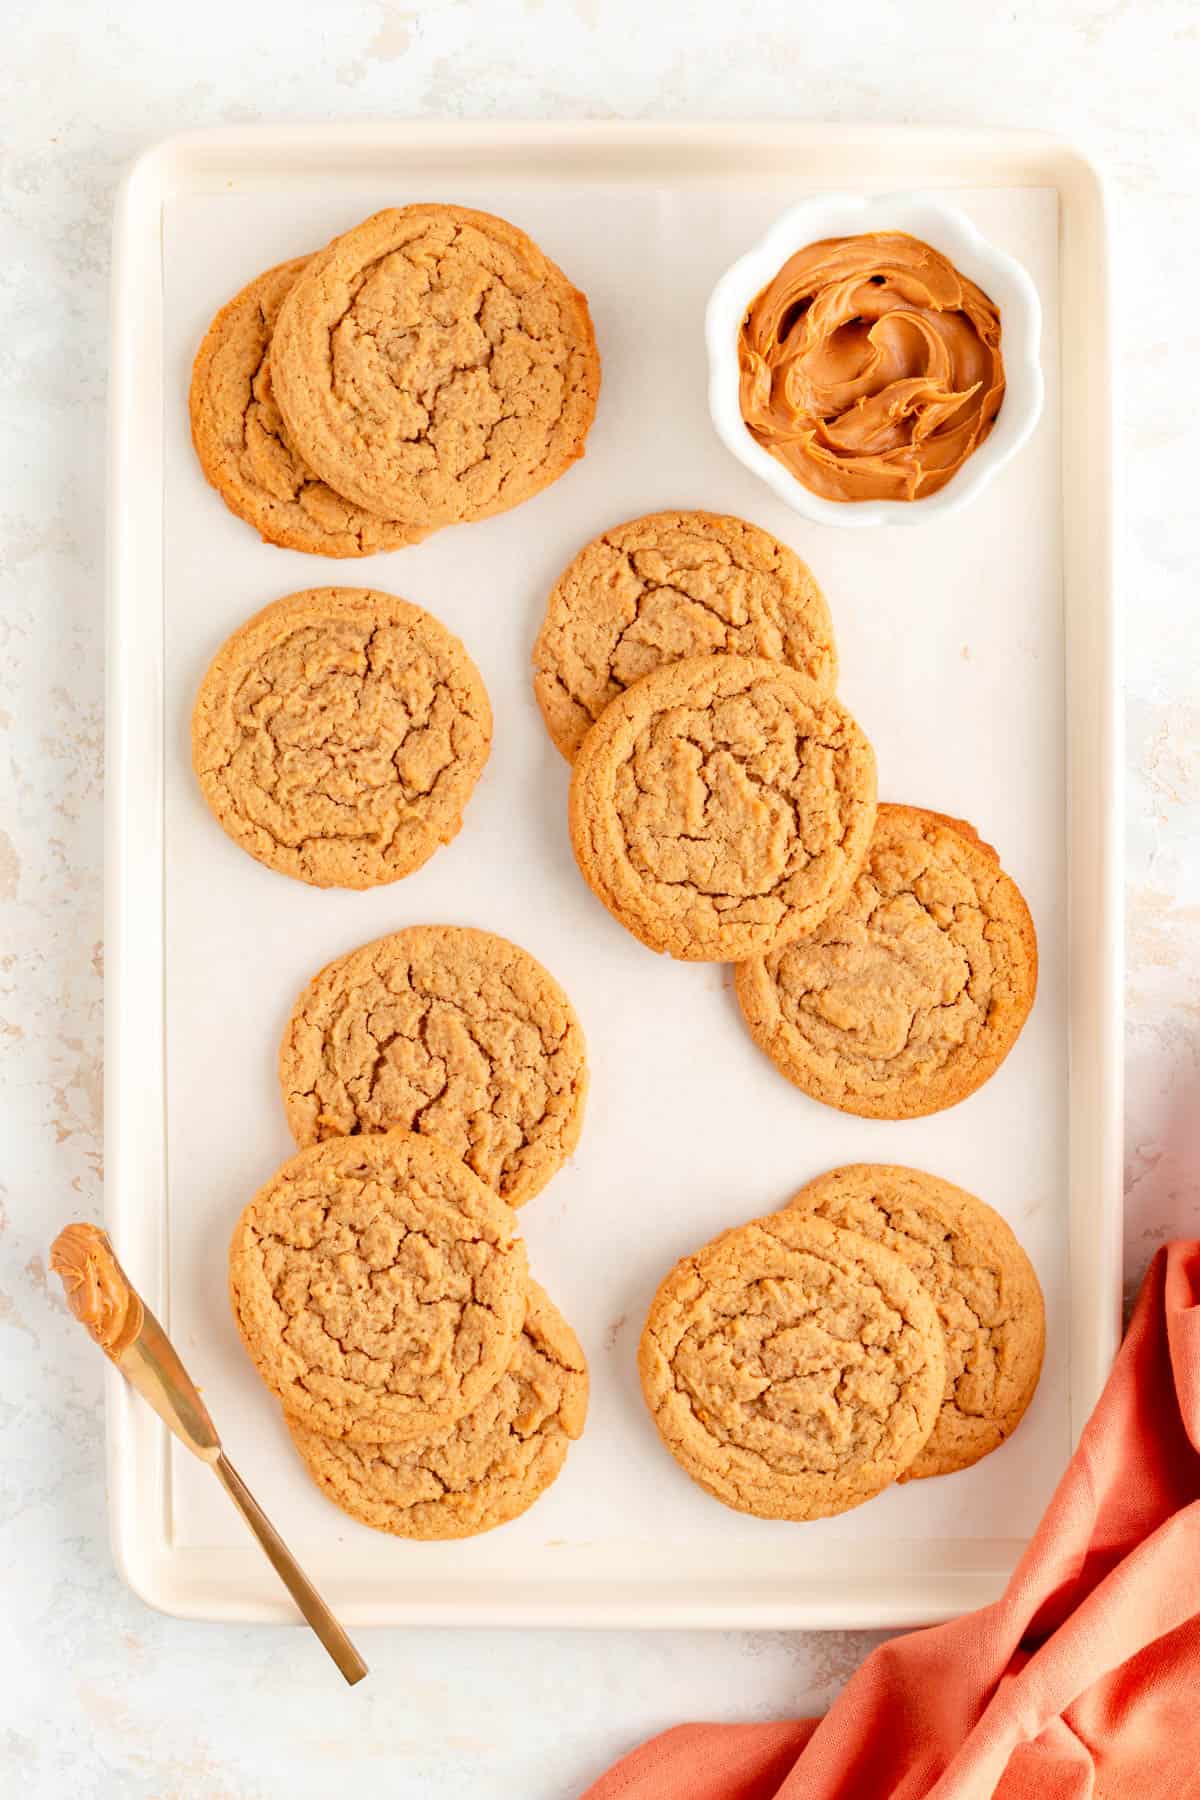 plain peanut butter cookies scattered on a white baking sheet with bowl of peanut butter.